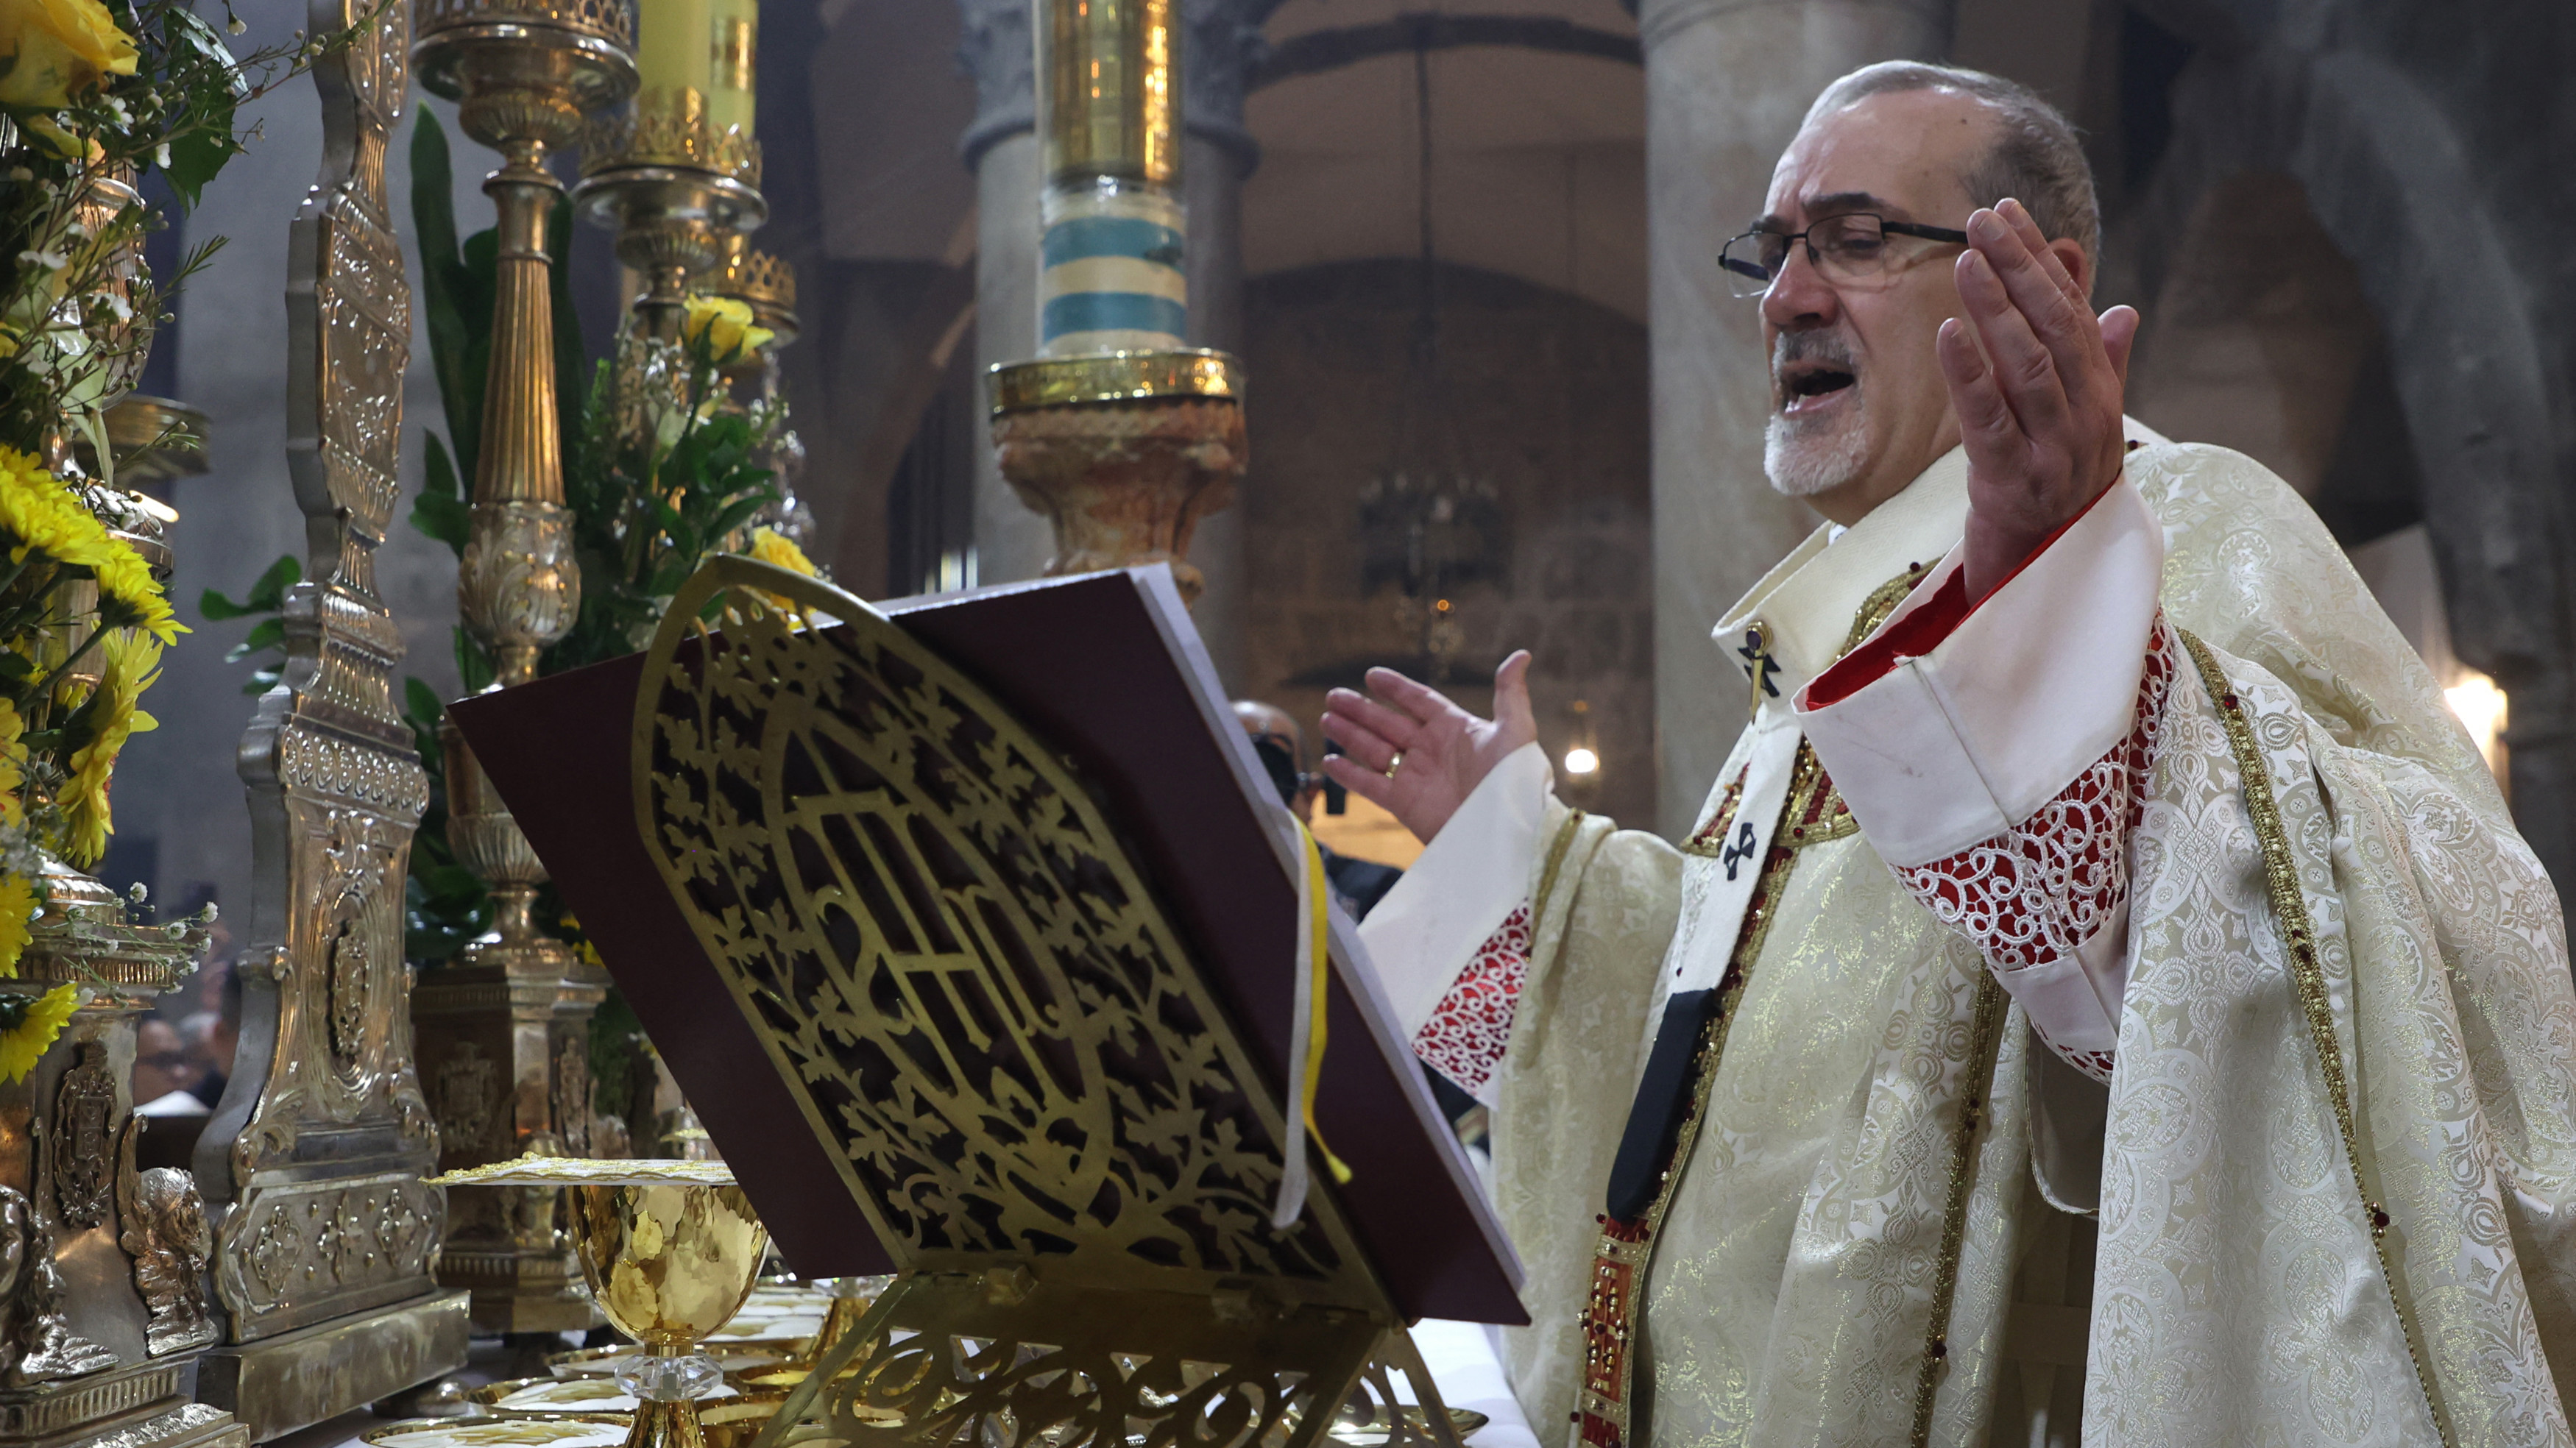 Latin Patriarch of Jerusalem Pierbattista Pizzaballa leads a mass on Easter Sunday at the Church of the Holy Sepulchre in Jerusalem on 9 April 2023 (AFP)